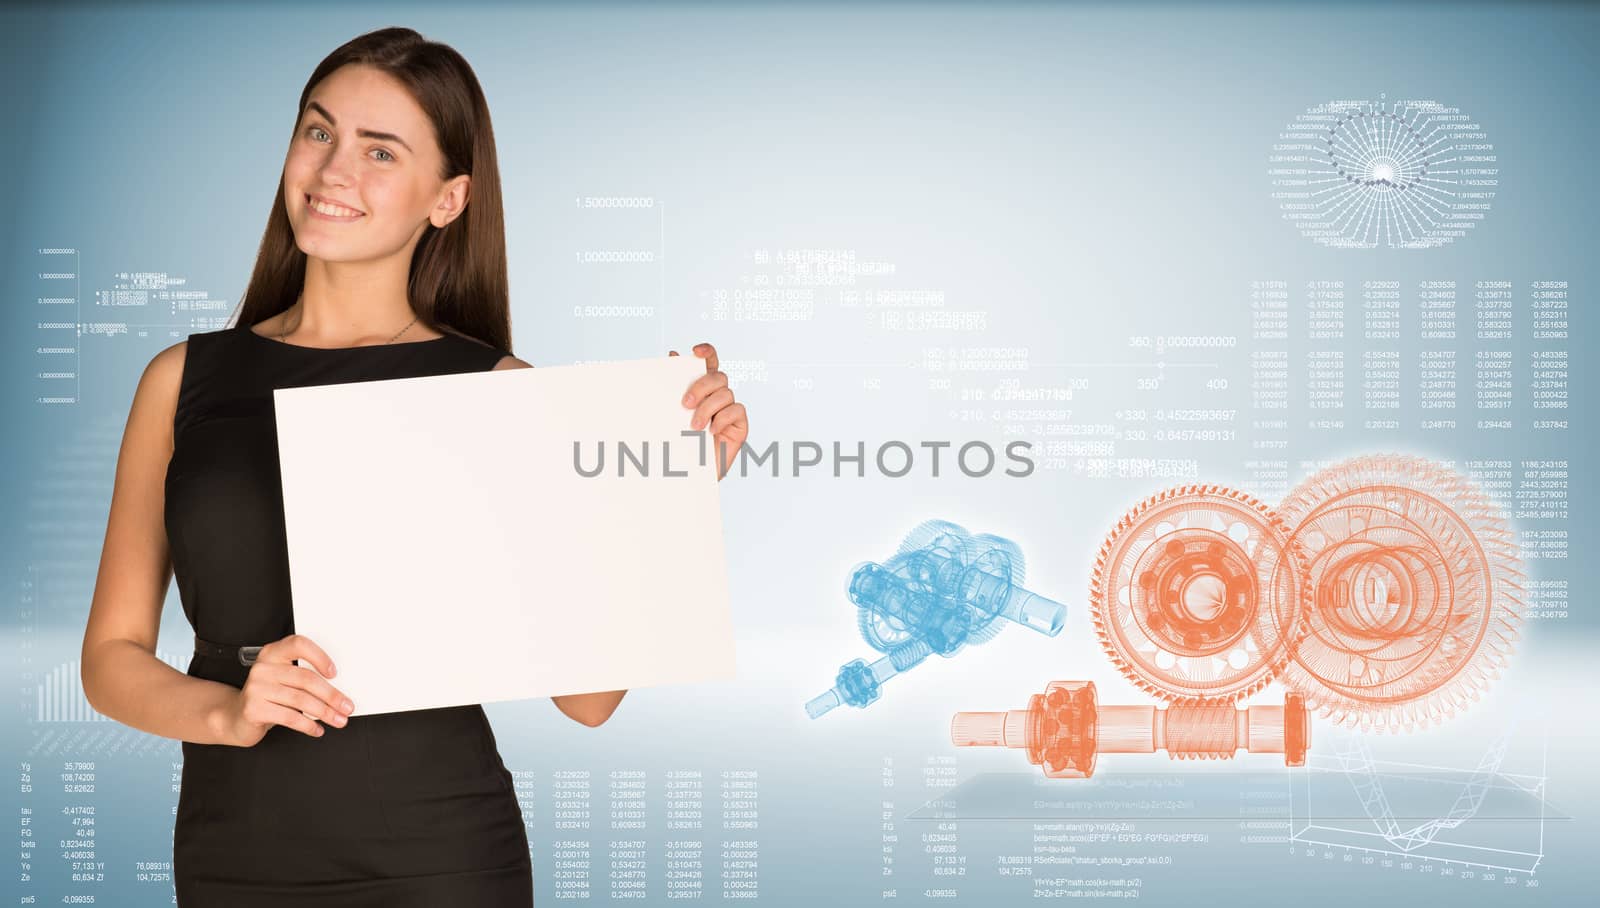 Businesswoman holding paper sheet. High-tech wire-frame gears and graphs as backdrop